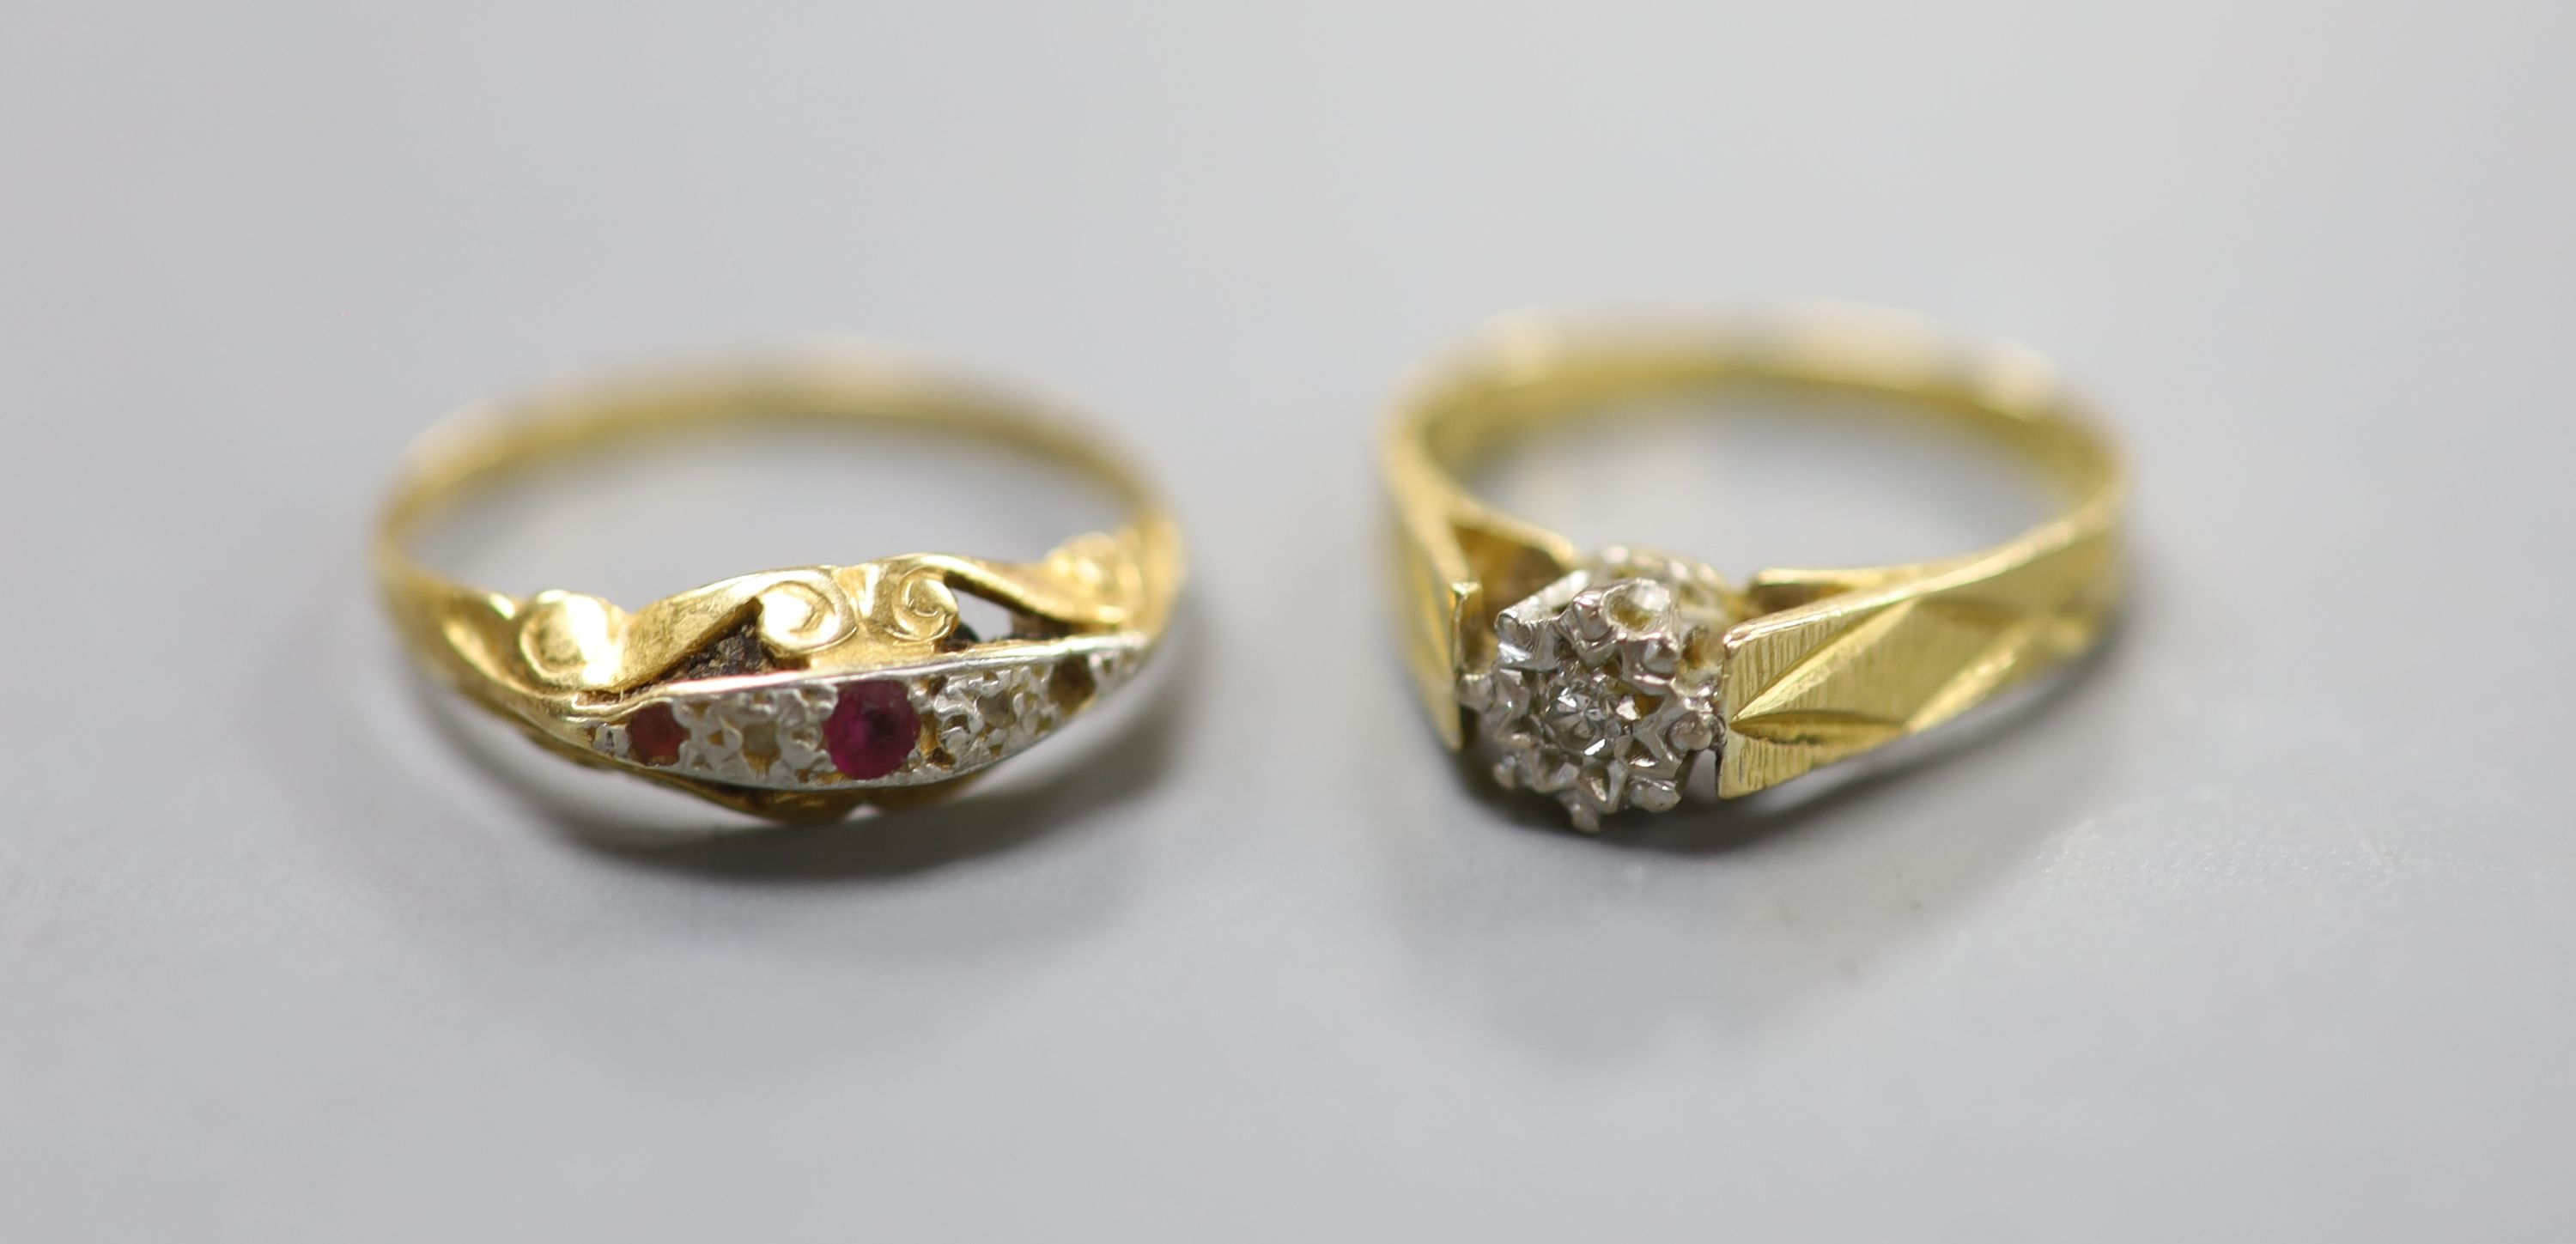 A modern 18ct gold and illusion set diamond ring and one other 18ct and gem set ring, gross weight 4.1 grams.